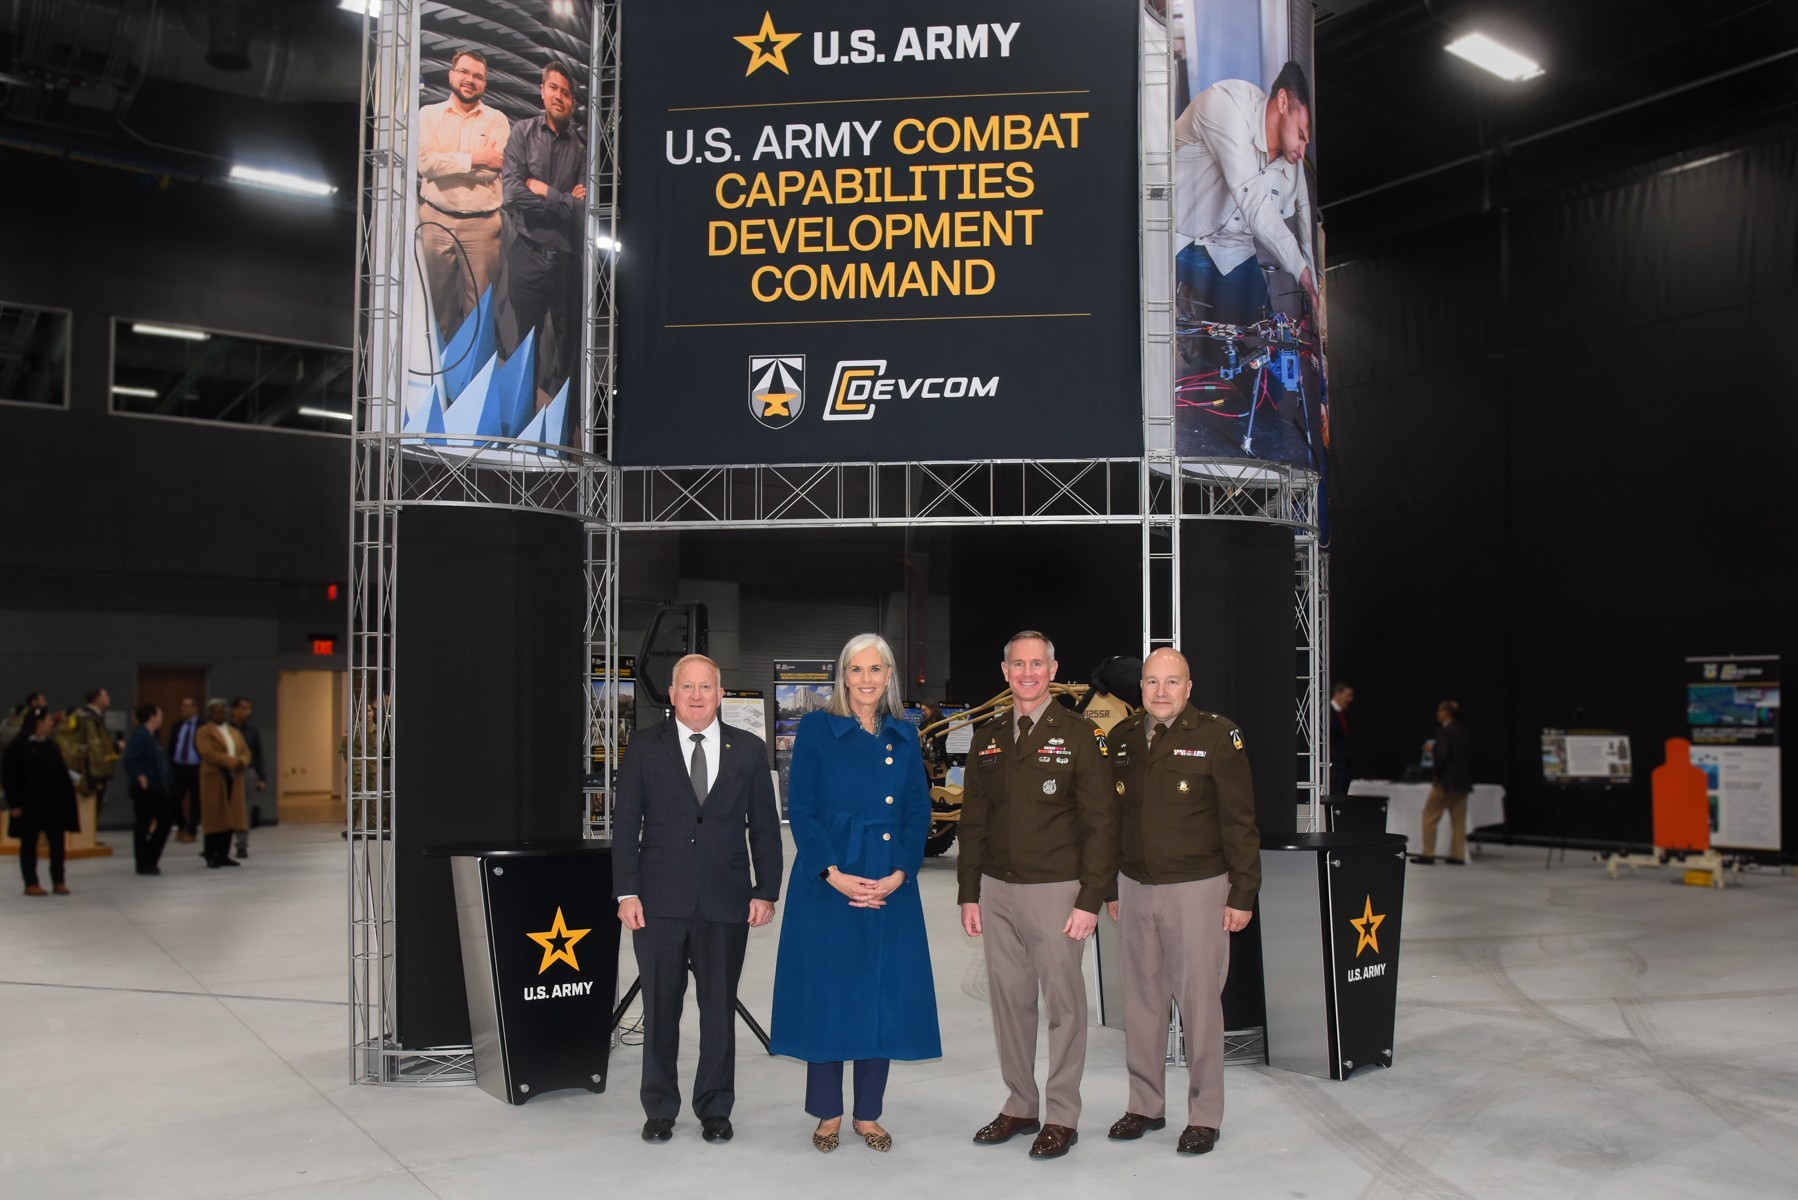 hosts open house for Army leaders, elected officials Article